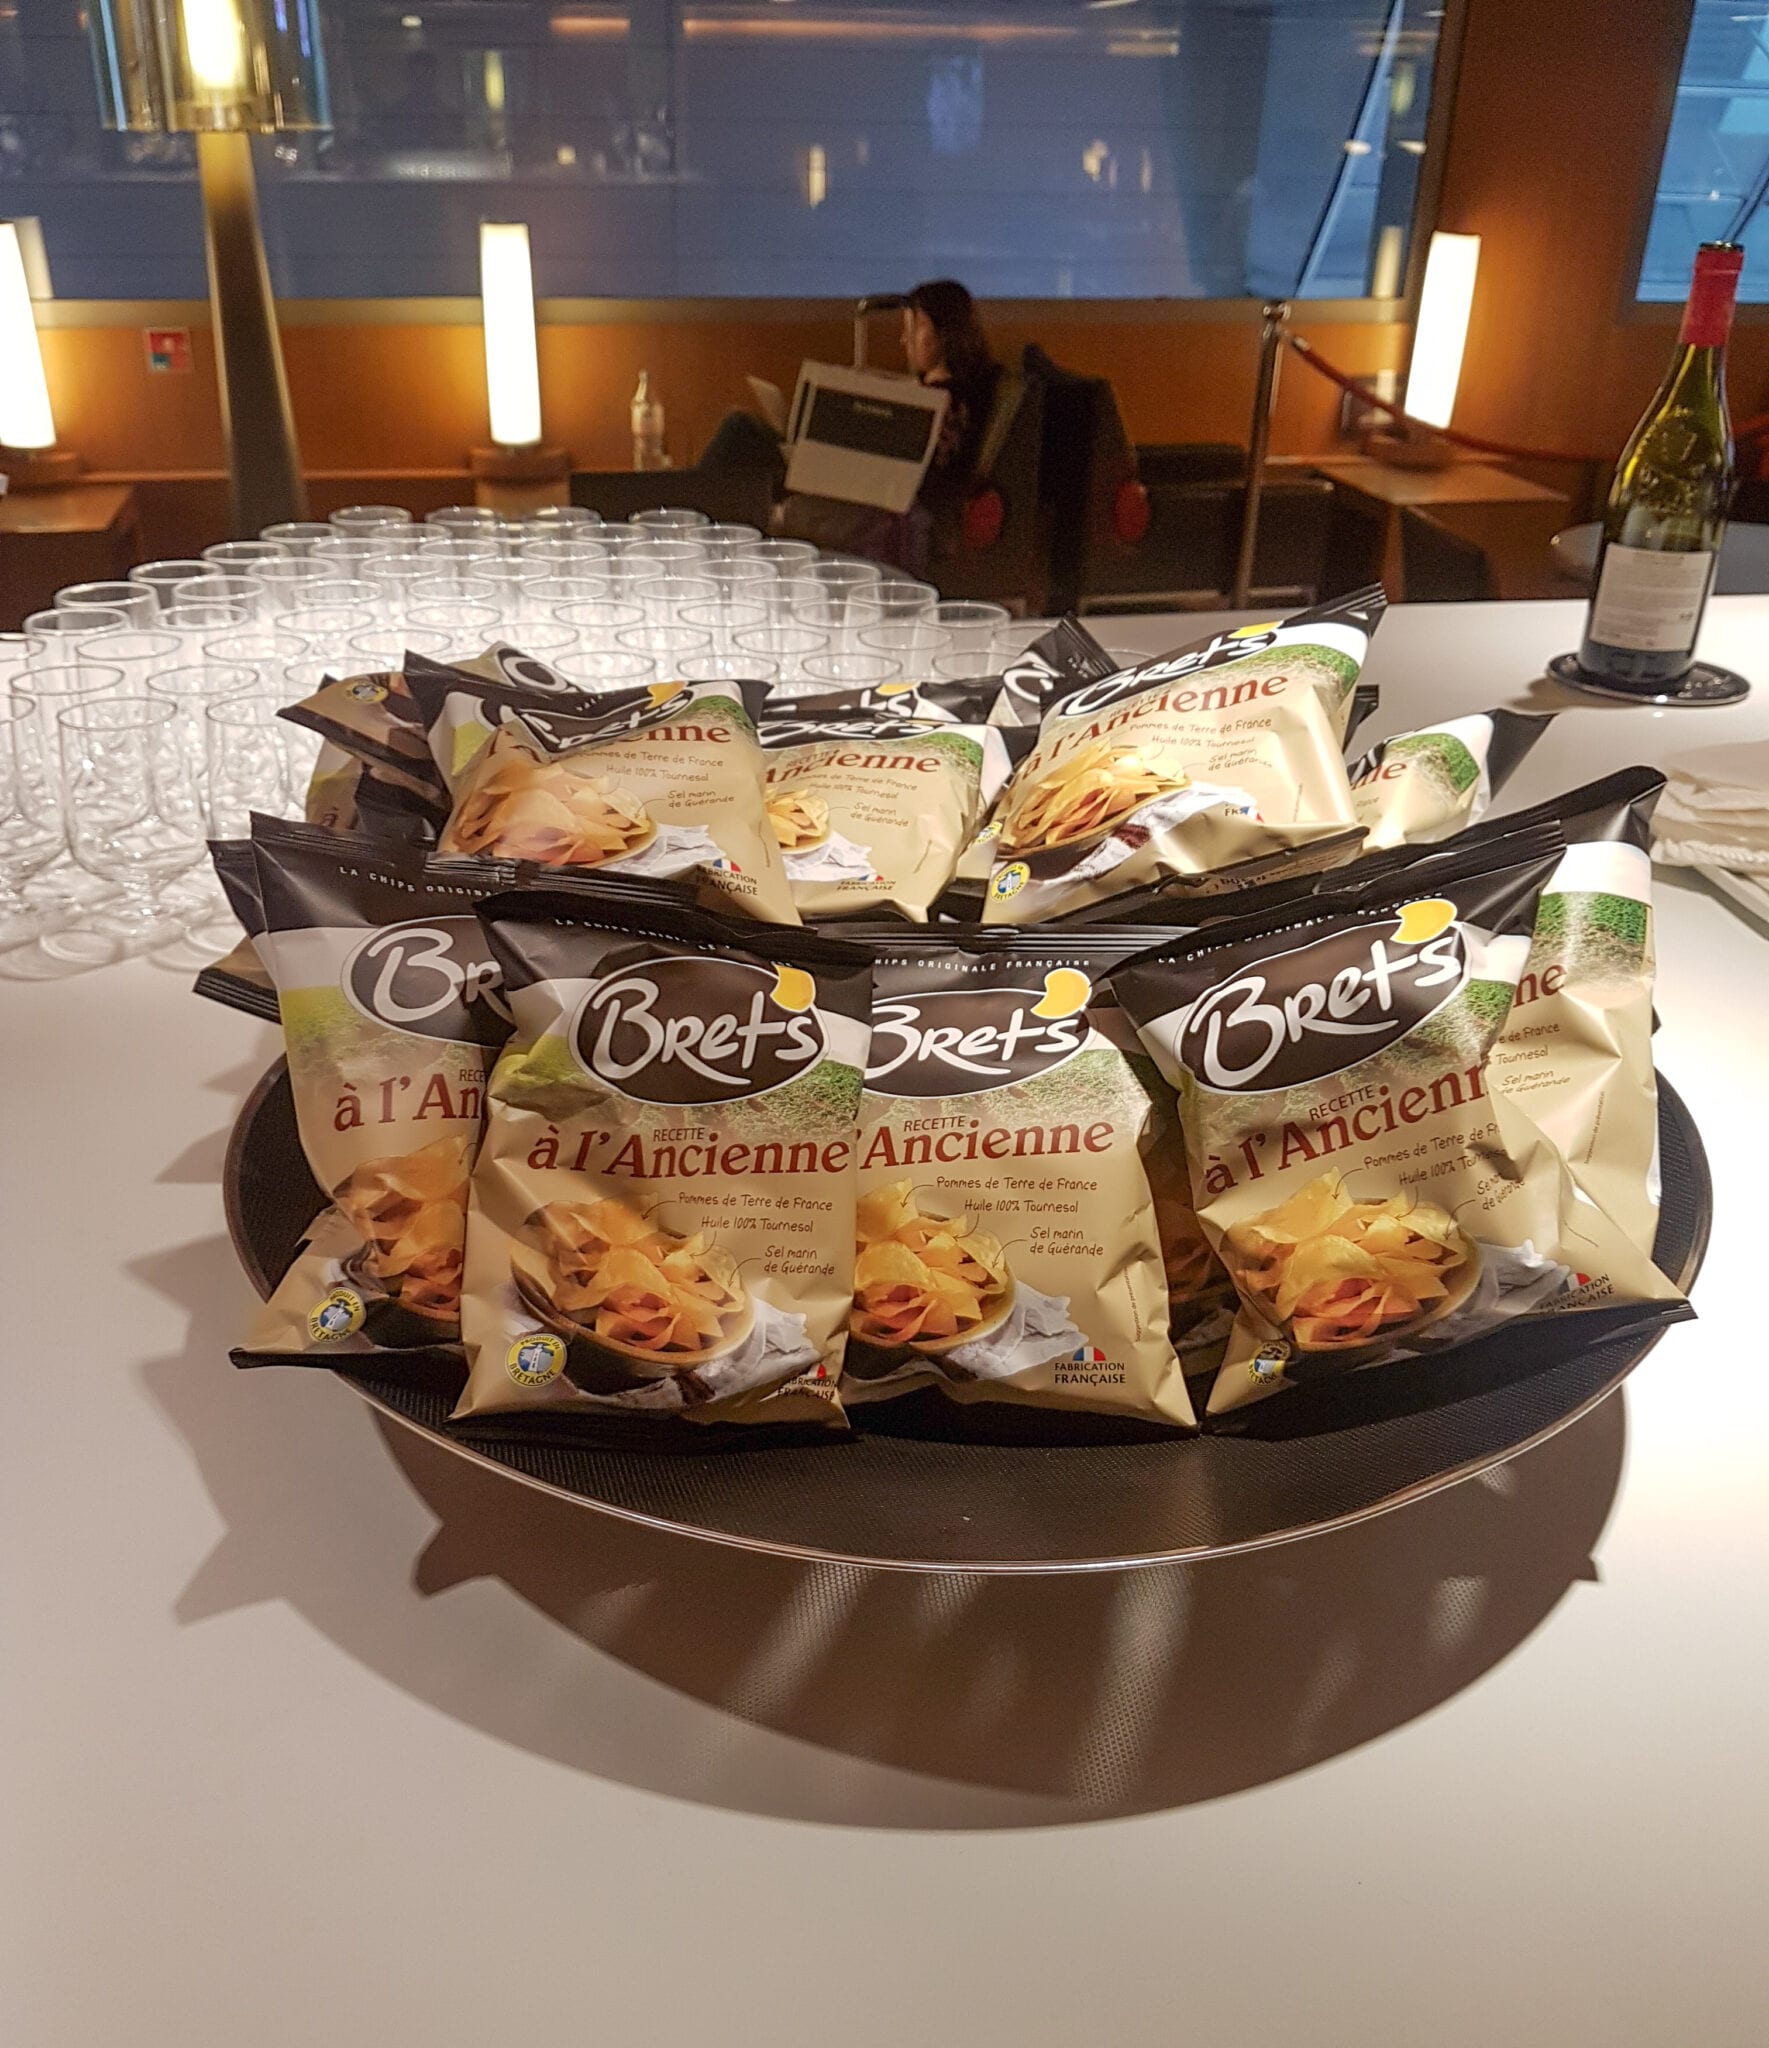 CDG K Lounge 20 scaled - REVIEW - Air France Business Class Lounge : Paris CDG - Terminal 2E - Hall K